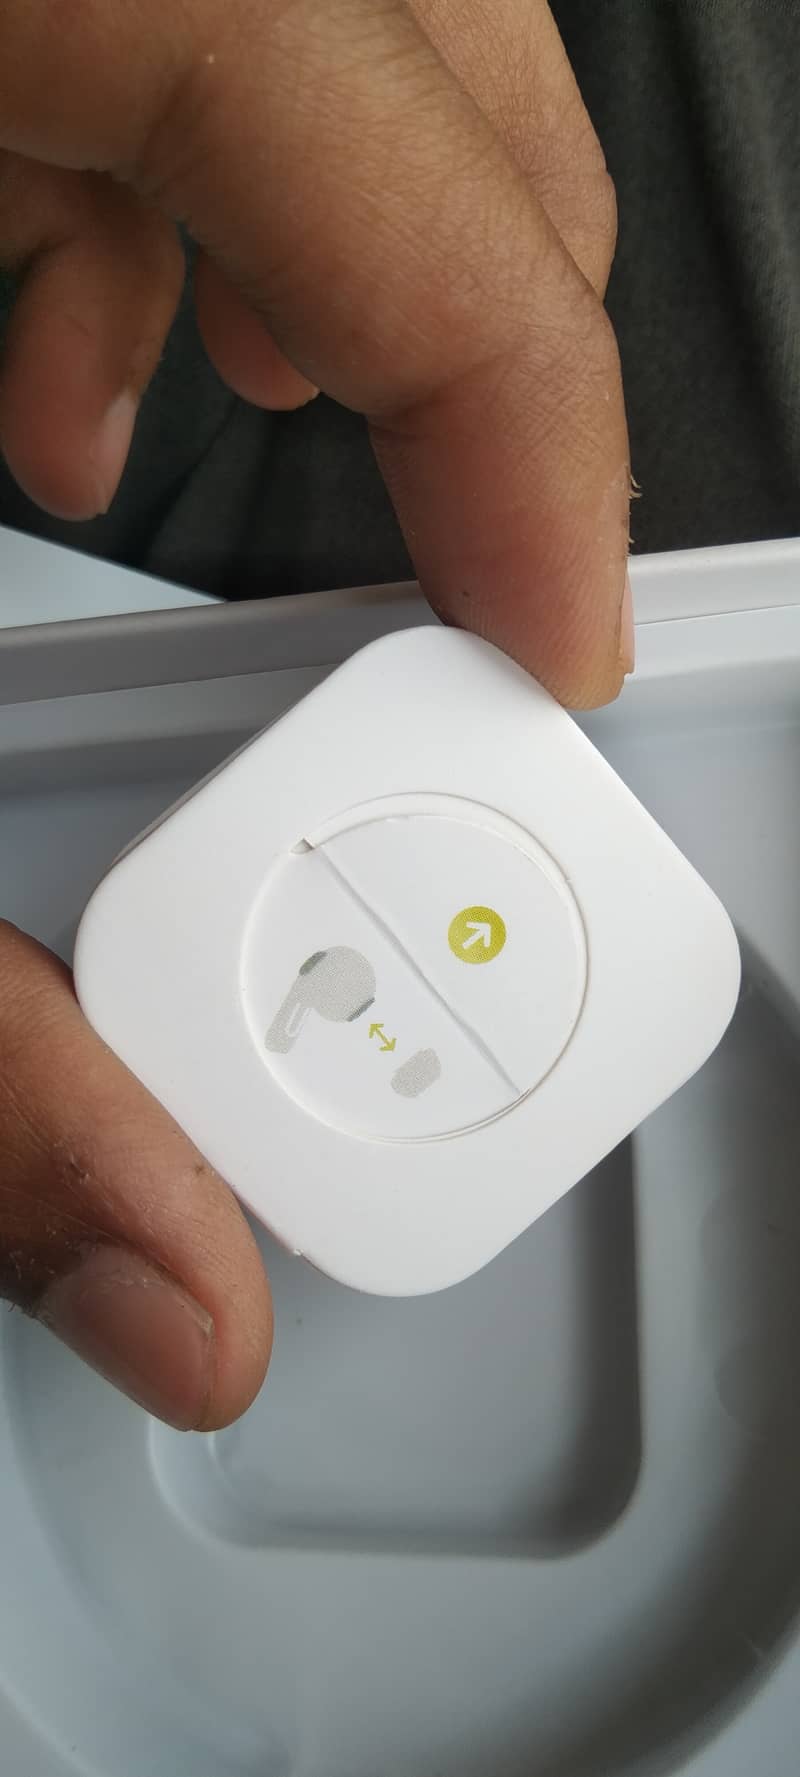 Apple Airpod first generation for sale 1